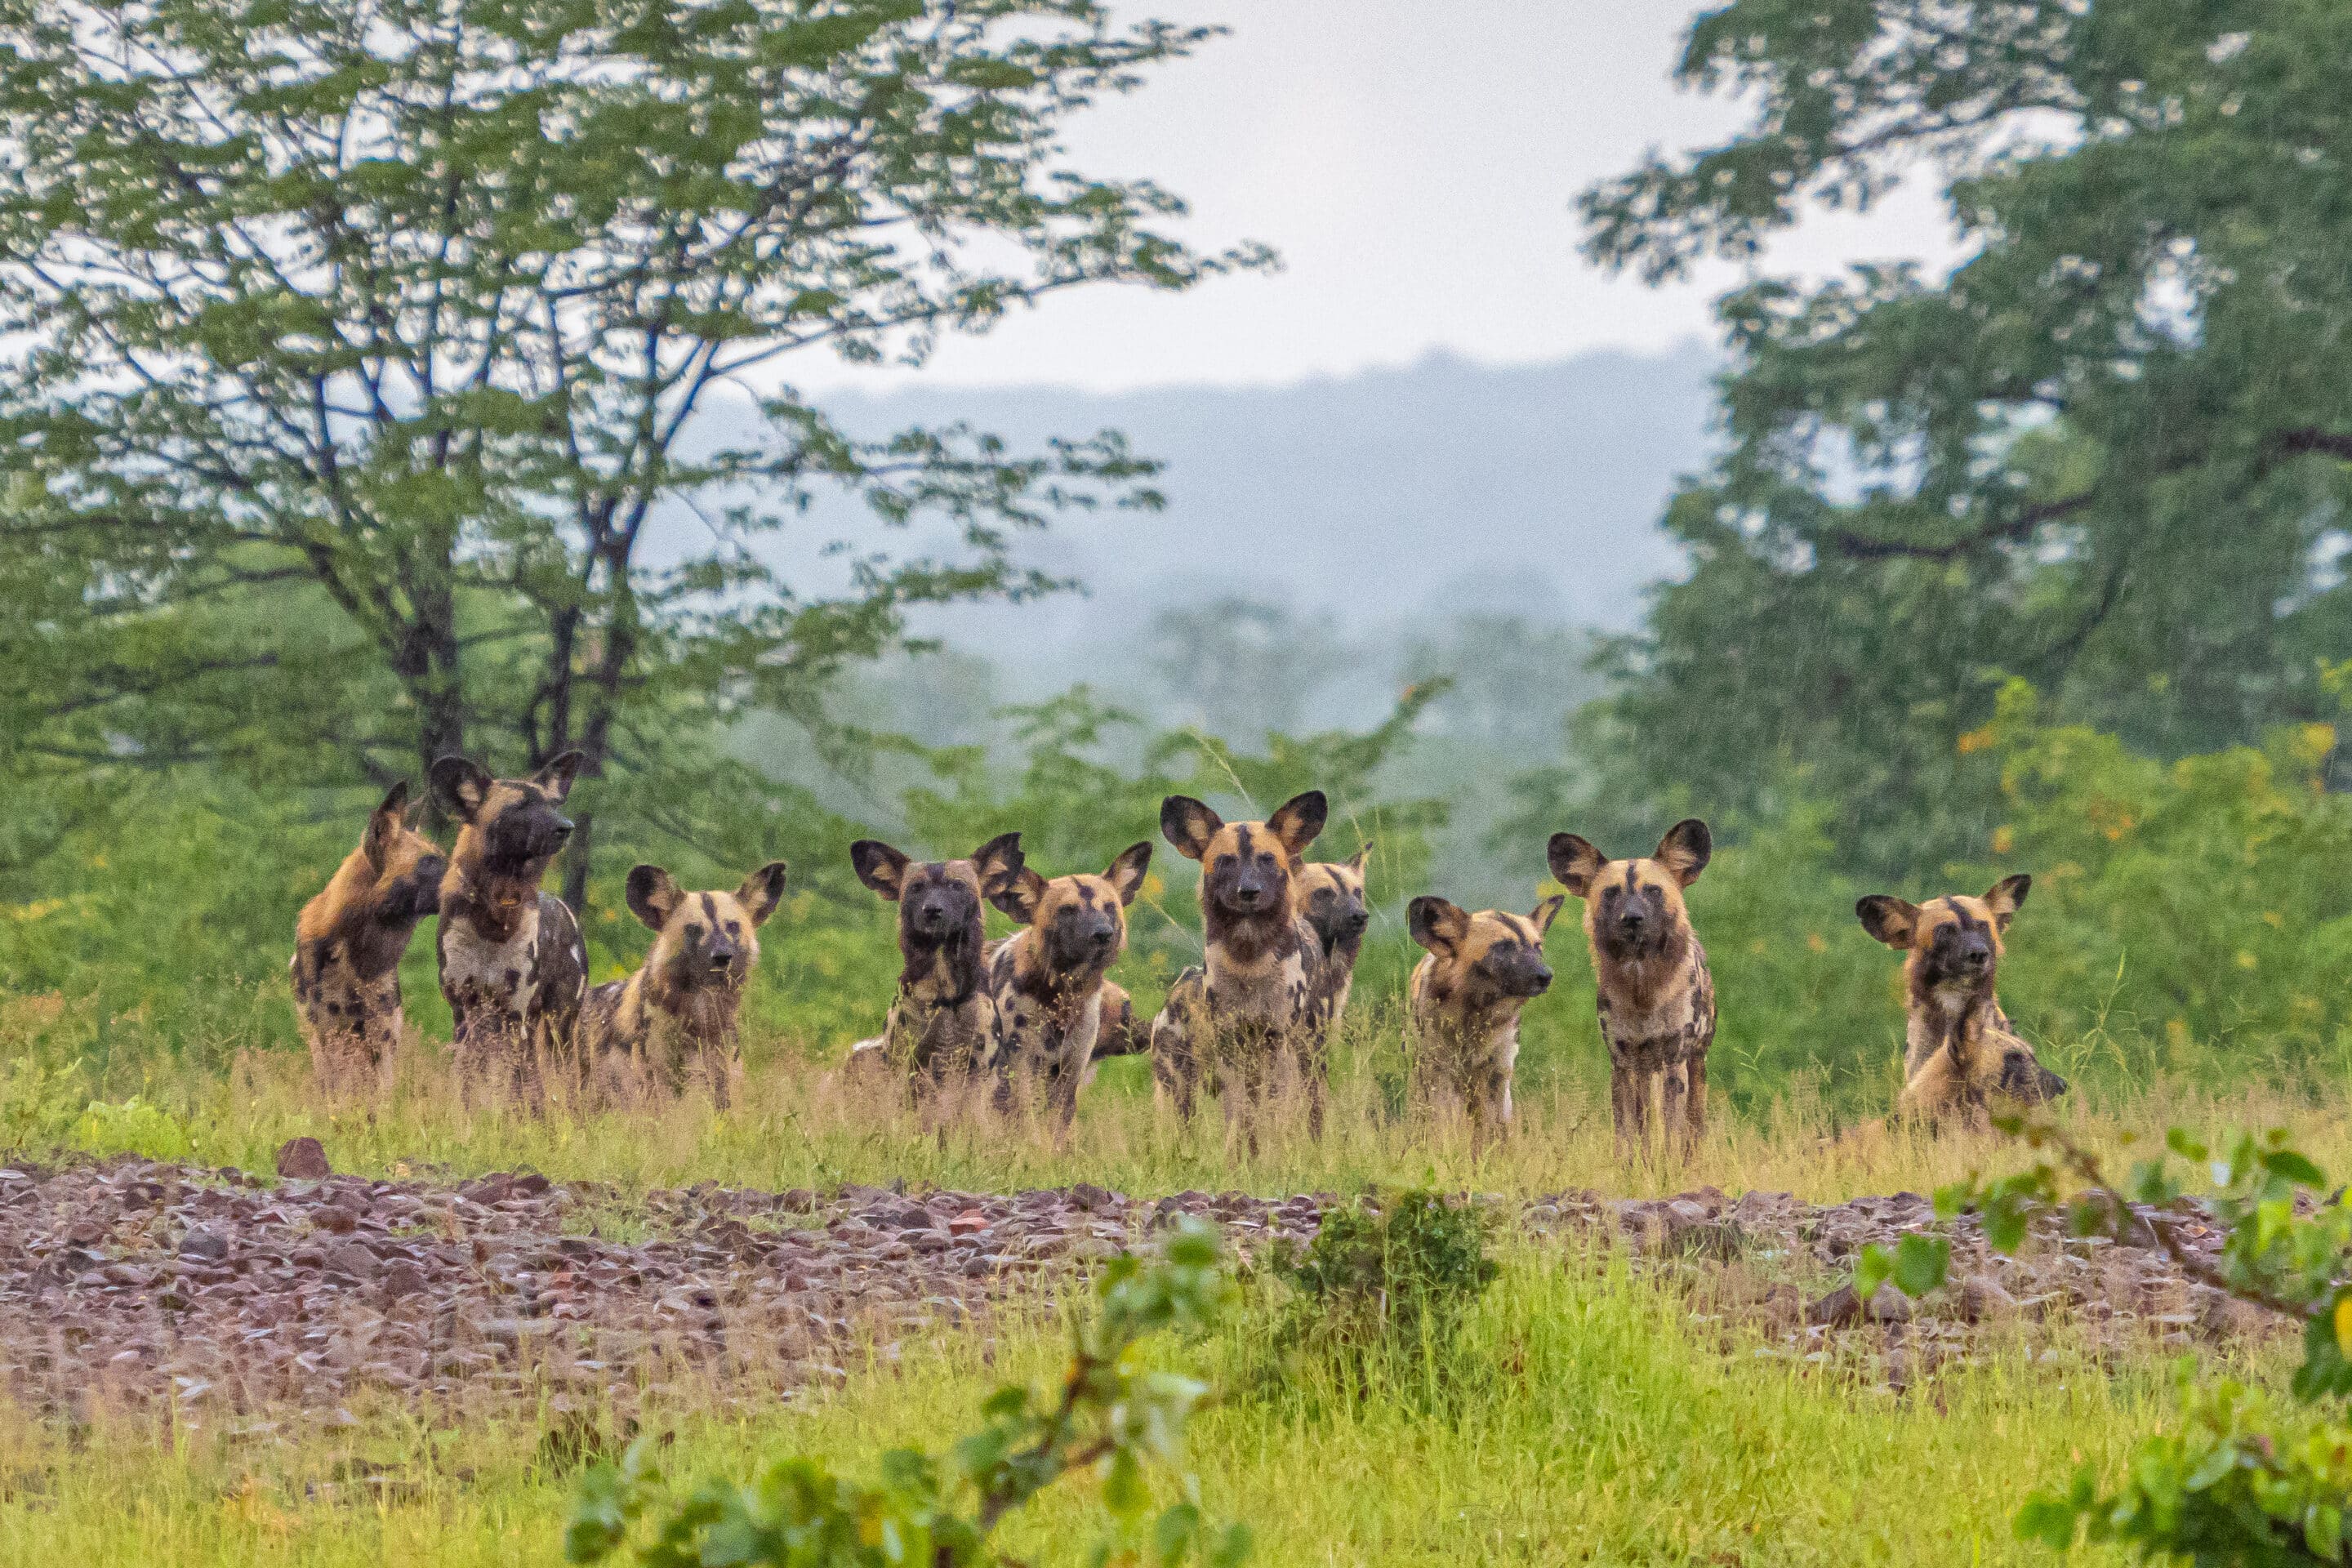 African Wild Dogs. Photo Credit: Mike Paredes